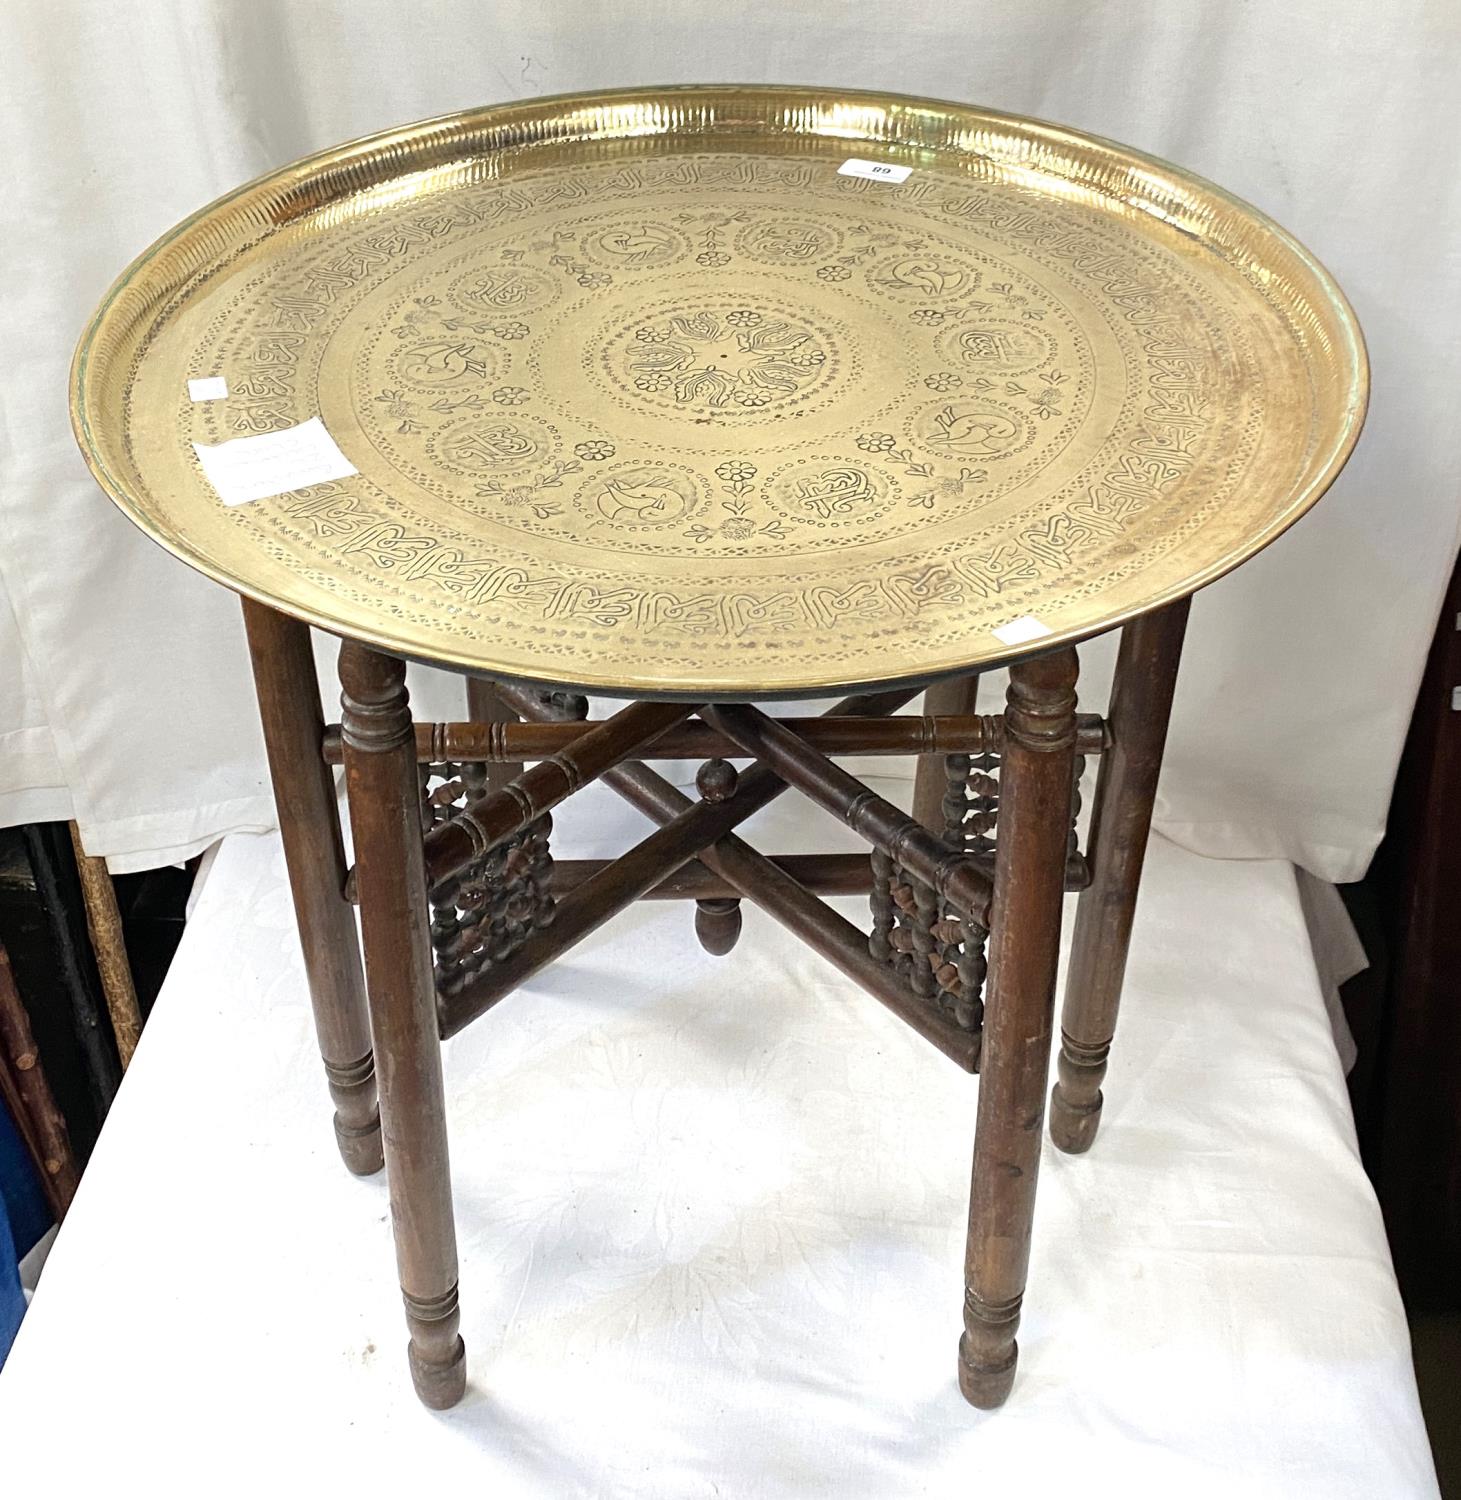 A 19th / 20th century Eastern brass table with folding wood legs - Image 3 of 3